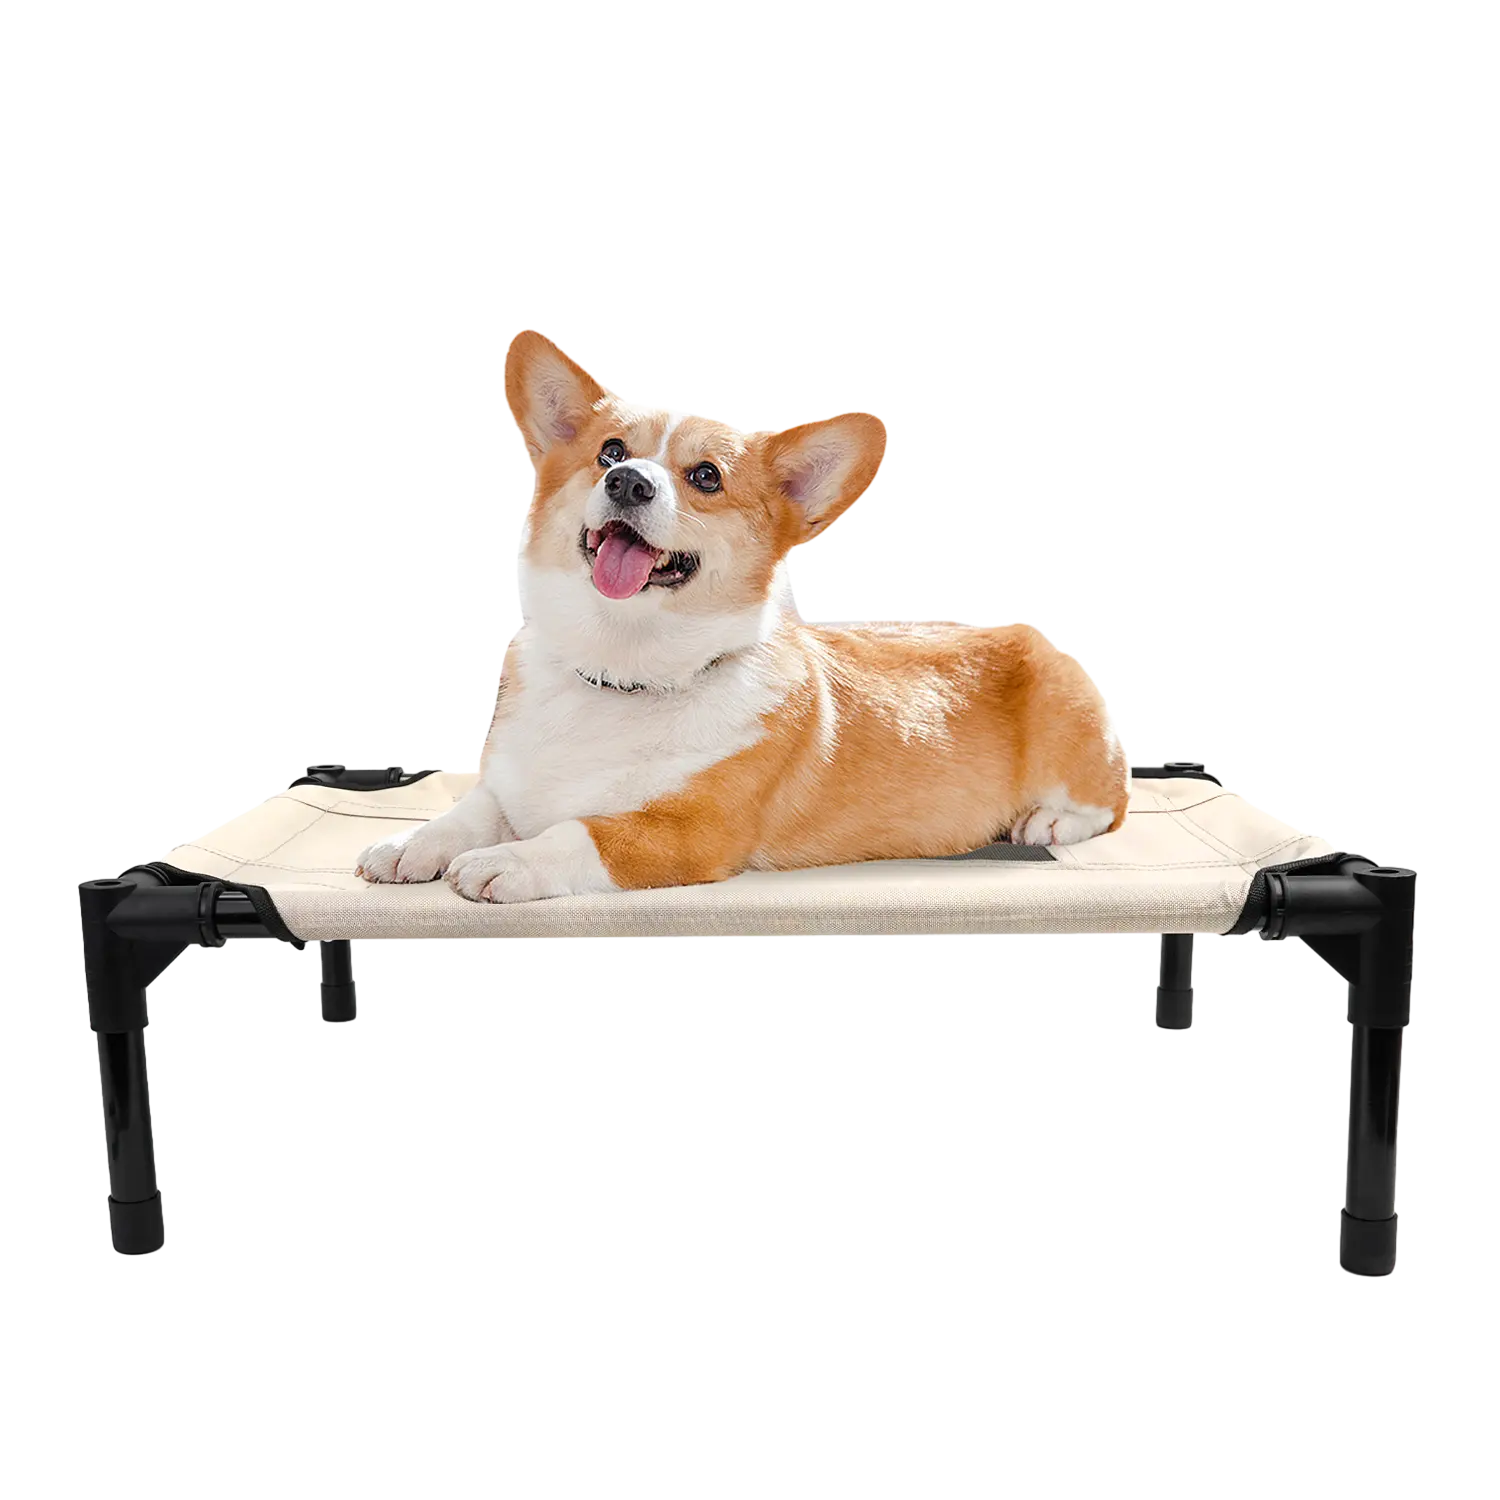 New 600D Oxford Fabric Waterproof Breathable Mech Portable Raised Elevated Dog Bed Cooling Summer Dog Cot Pet Bed